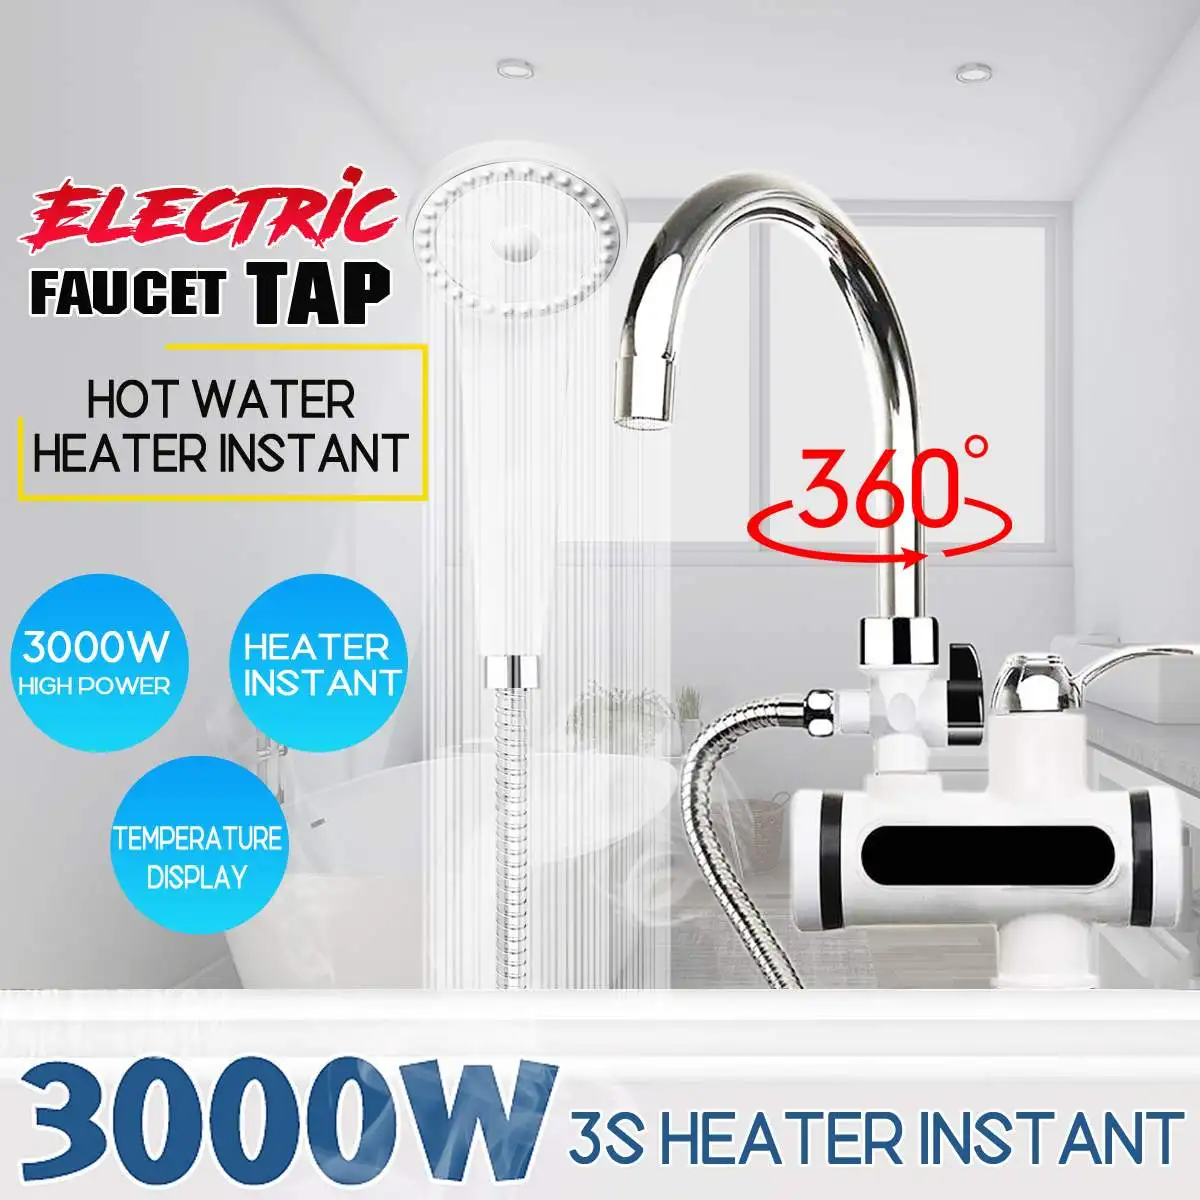 

220V Instant Electric Faucet Tap 3000W Hot Water Heater Stainless Steel 360° Rotatable LED Display Bathroom Kitchen Showerhead